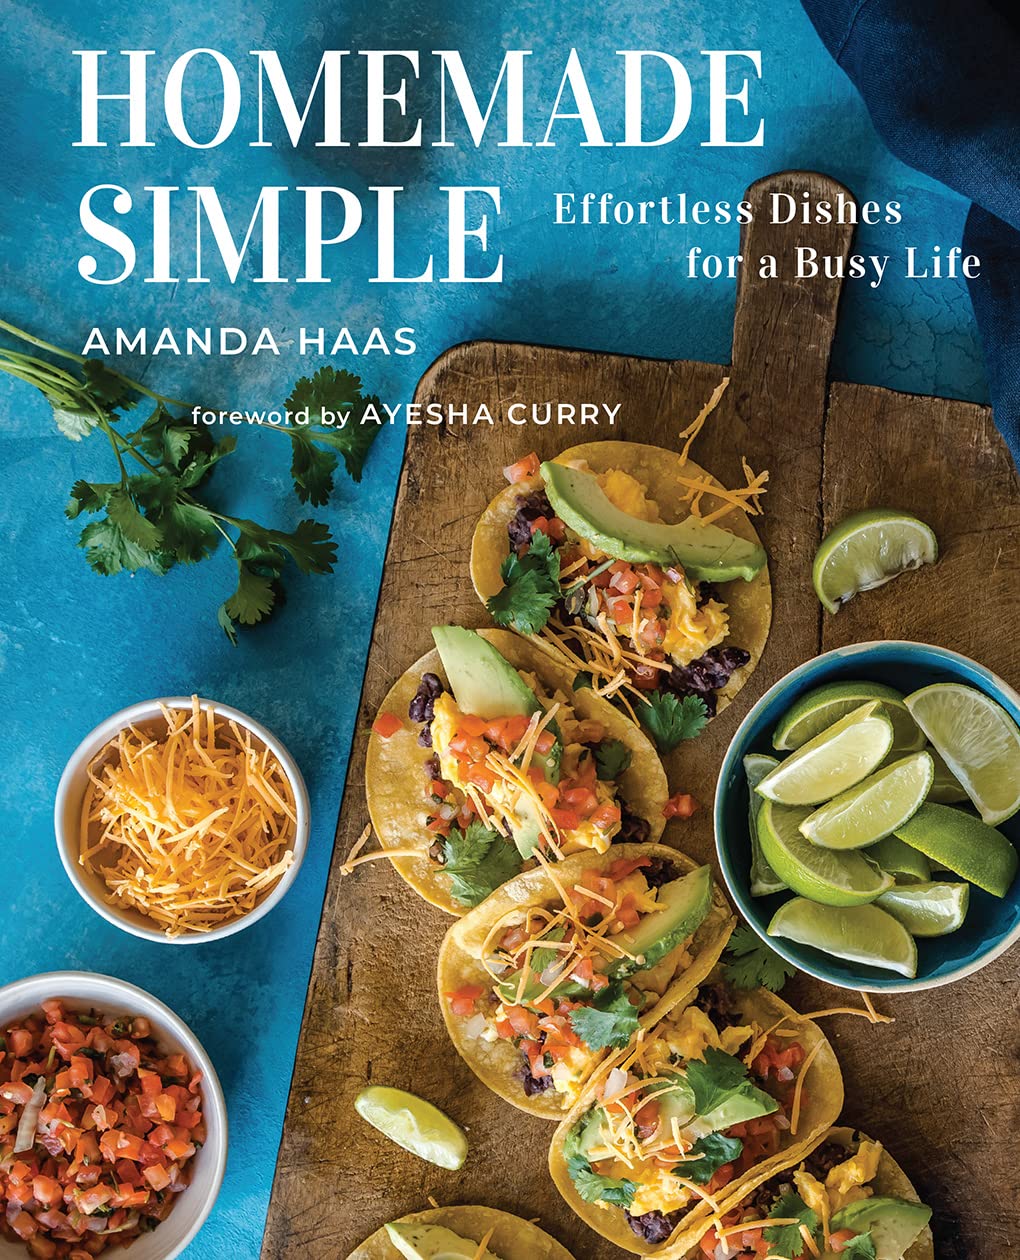 Homemade Simple: Effortless Dishes for a Busy Life (Amanda Haas) *Signed*